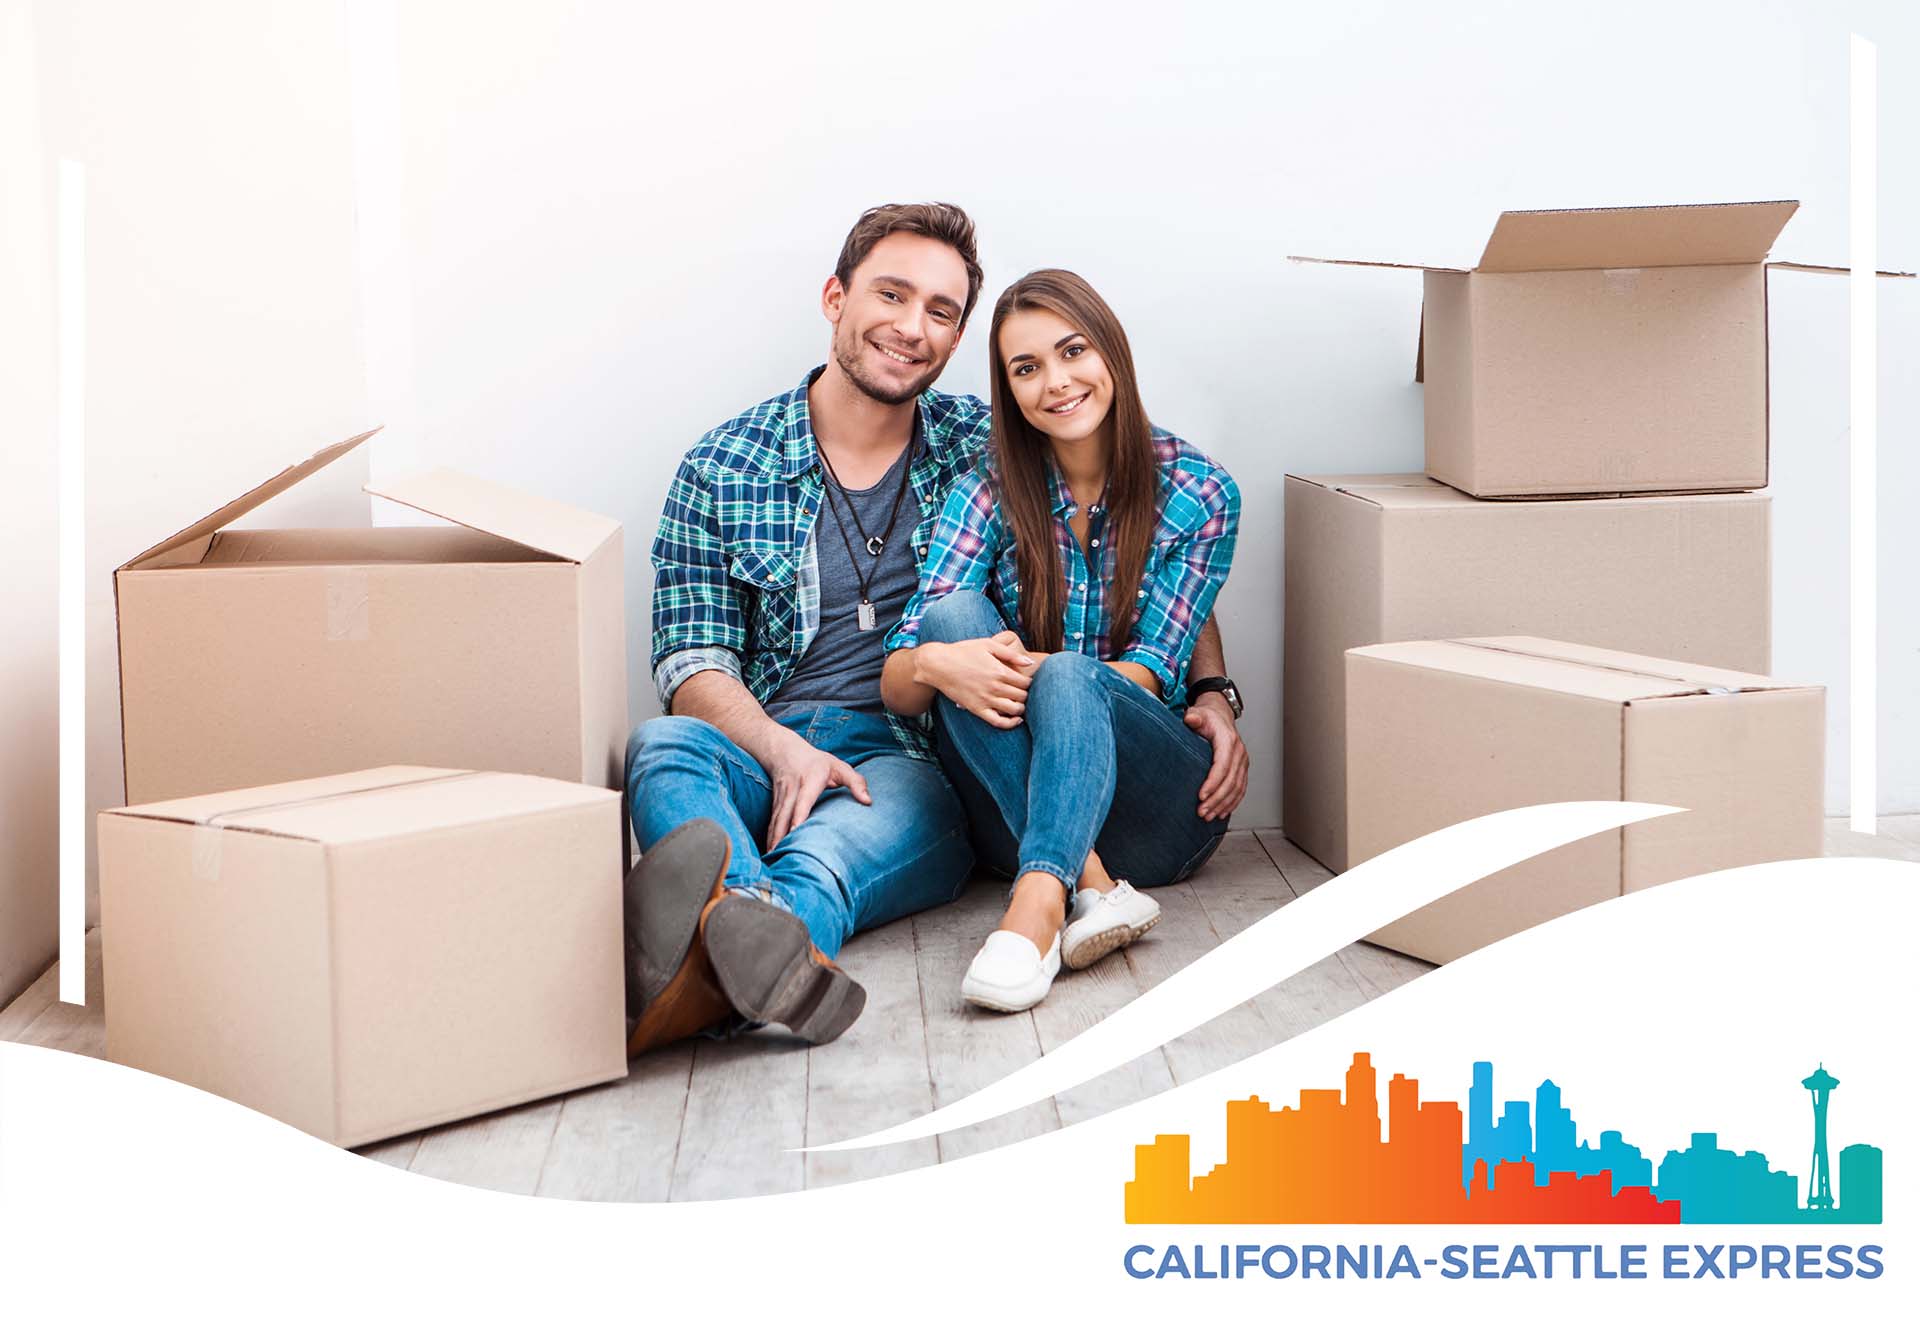 Check out some of the best tips for moving in together